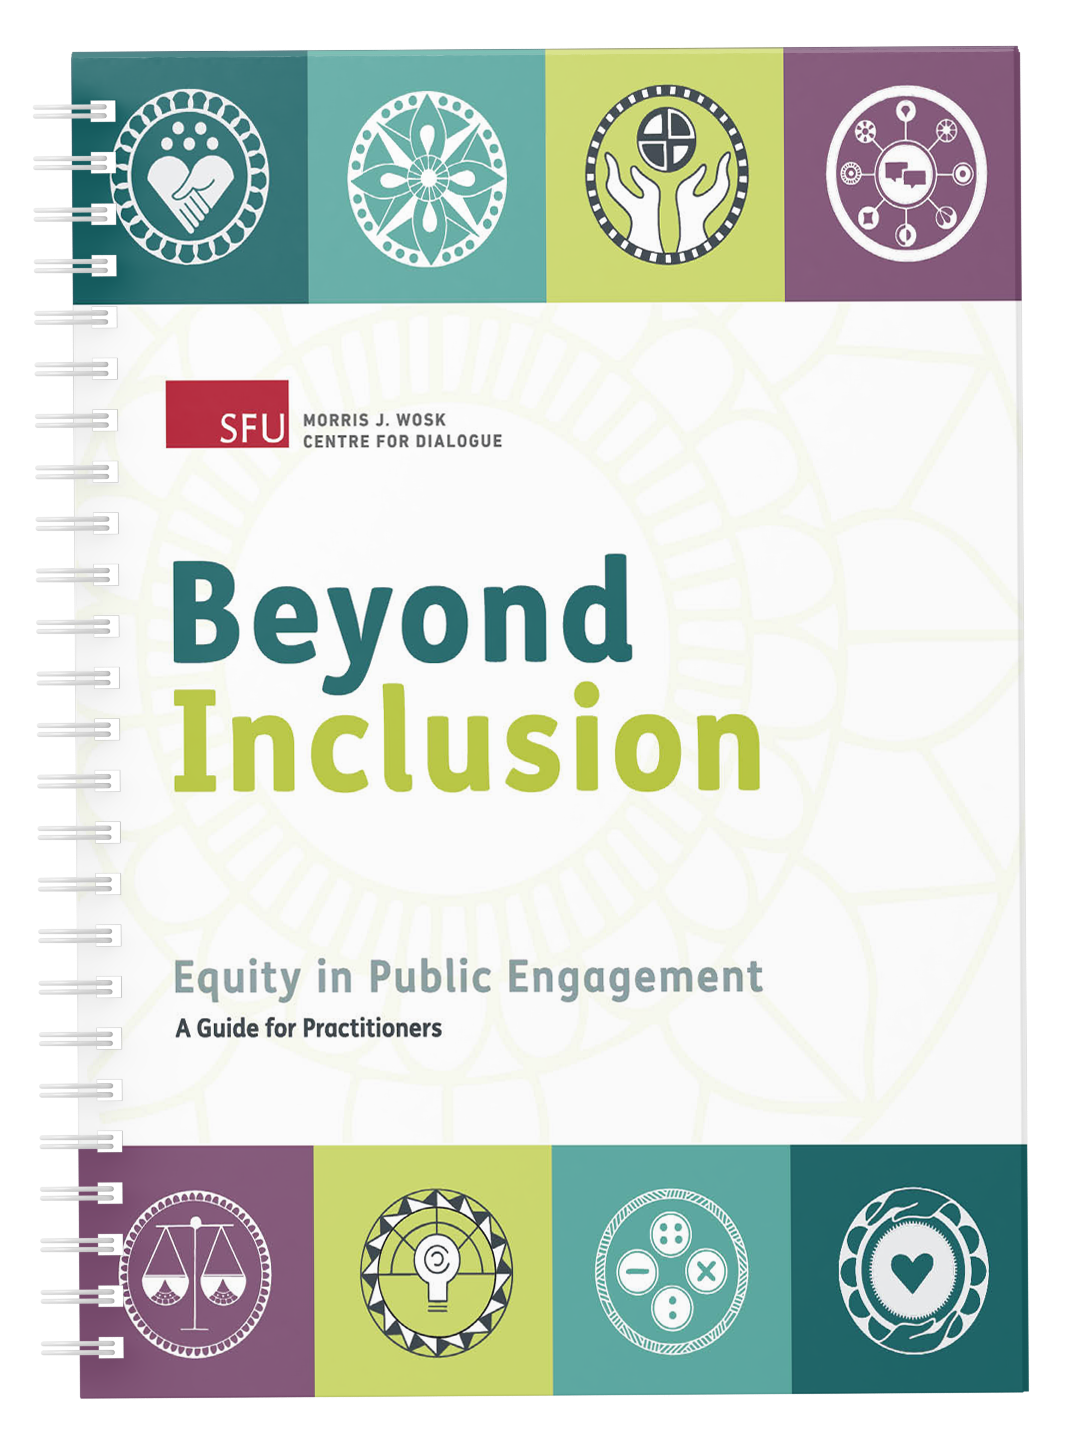 Cover of Beyond Inclusion guide